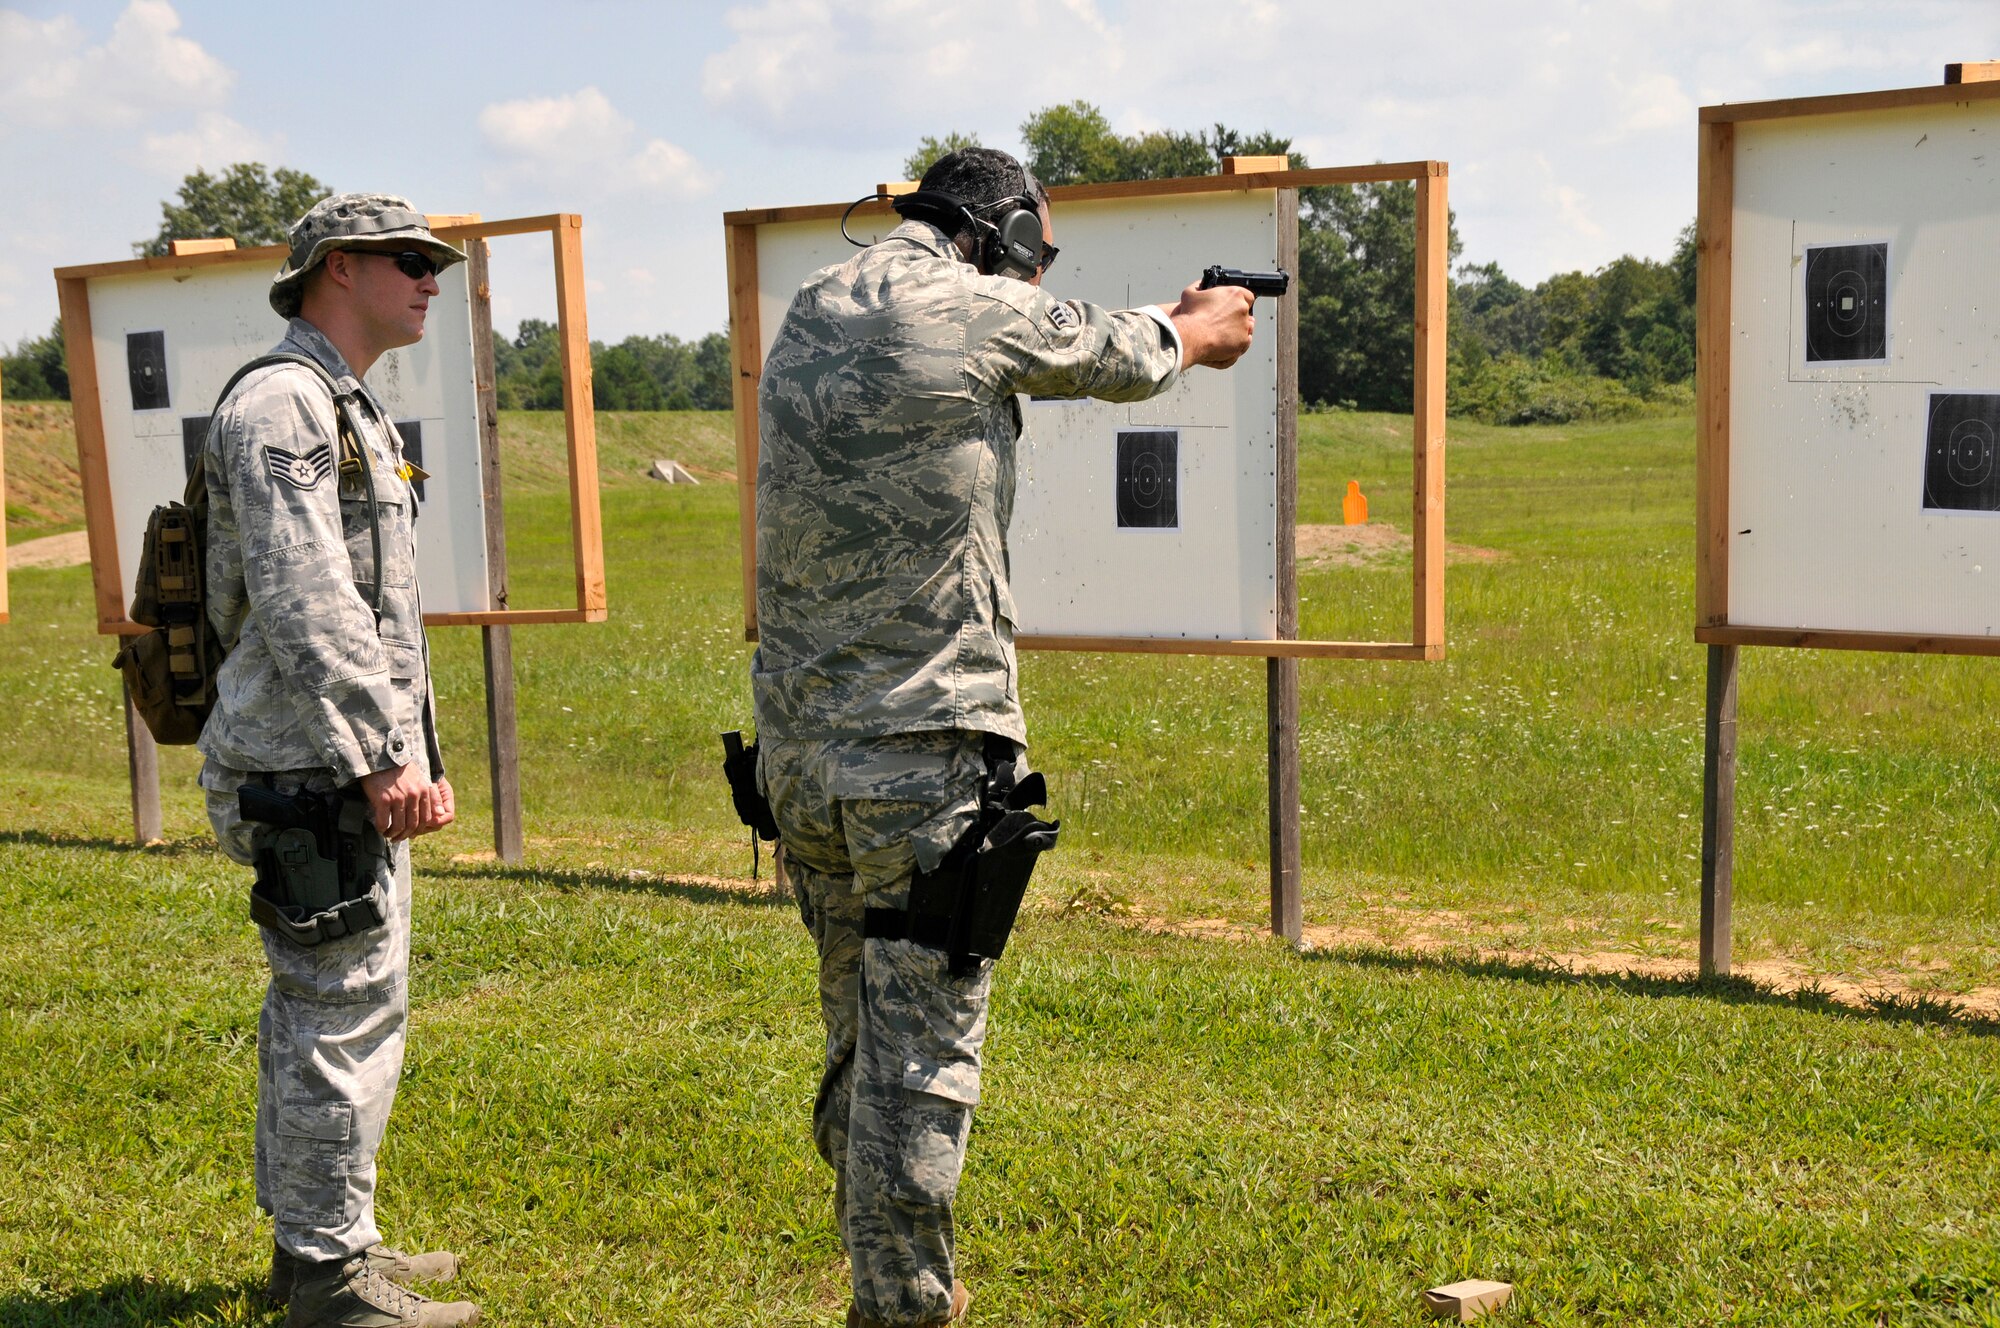 Staff Sgt. Scott Cavin (left), 134 ARW Security Forces Squadron Journeyman, serves as a range line safety for a fellow Airman at the 2014 Tennessee Adjutant General Marksmanship Pistol Match in Tullahoma, TN on Aug 15. The Tennesee TAG Match is held anually to promote marksmanship skills in the Army and Air National Guard. (U.S. Air National Guard photo by Master Sgt. Kendra M. Owenby, 134 ARW Public Affairs)